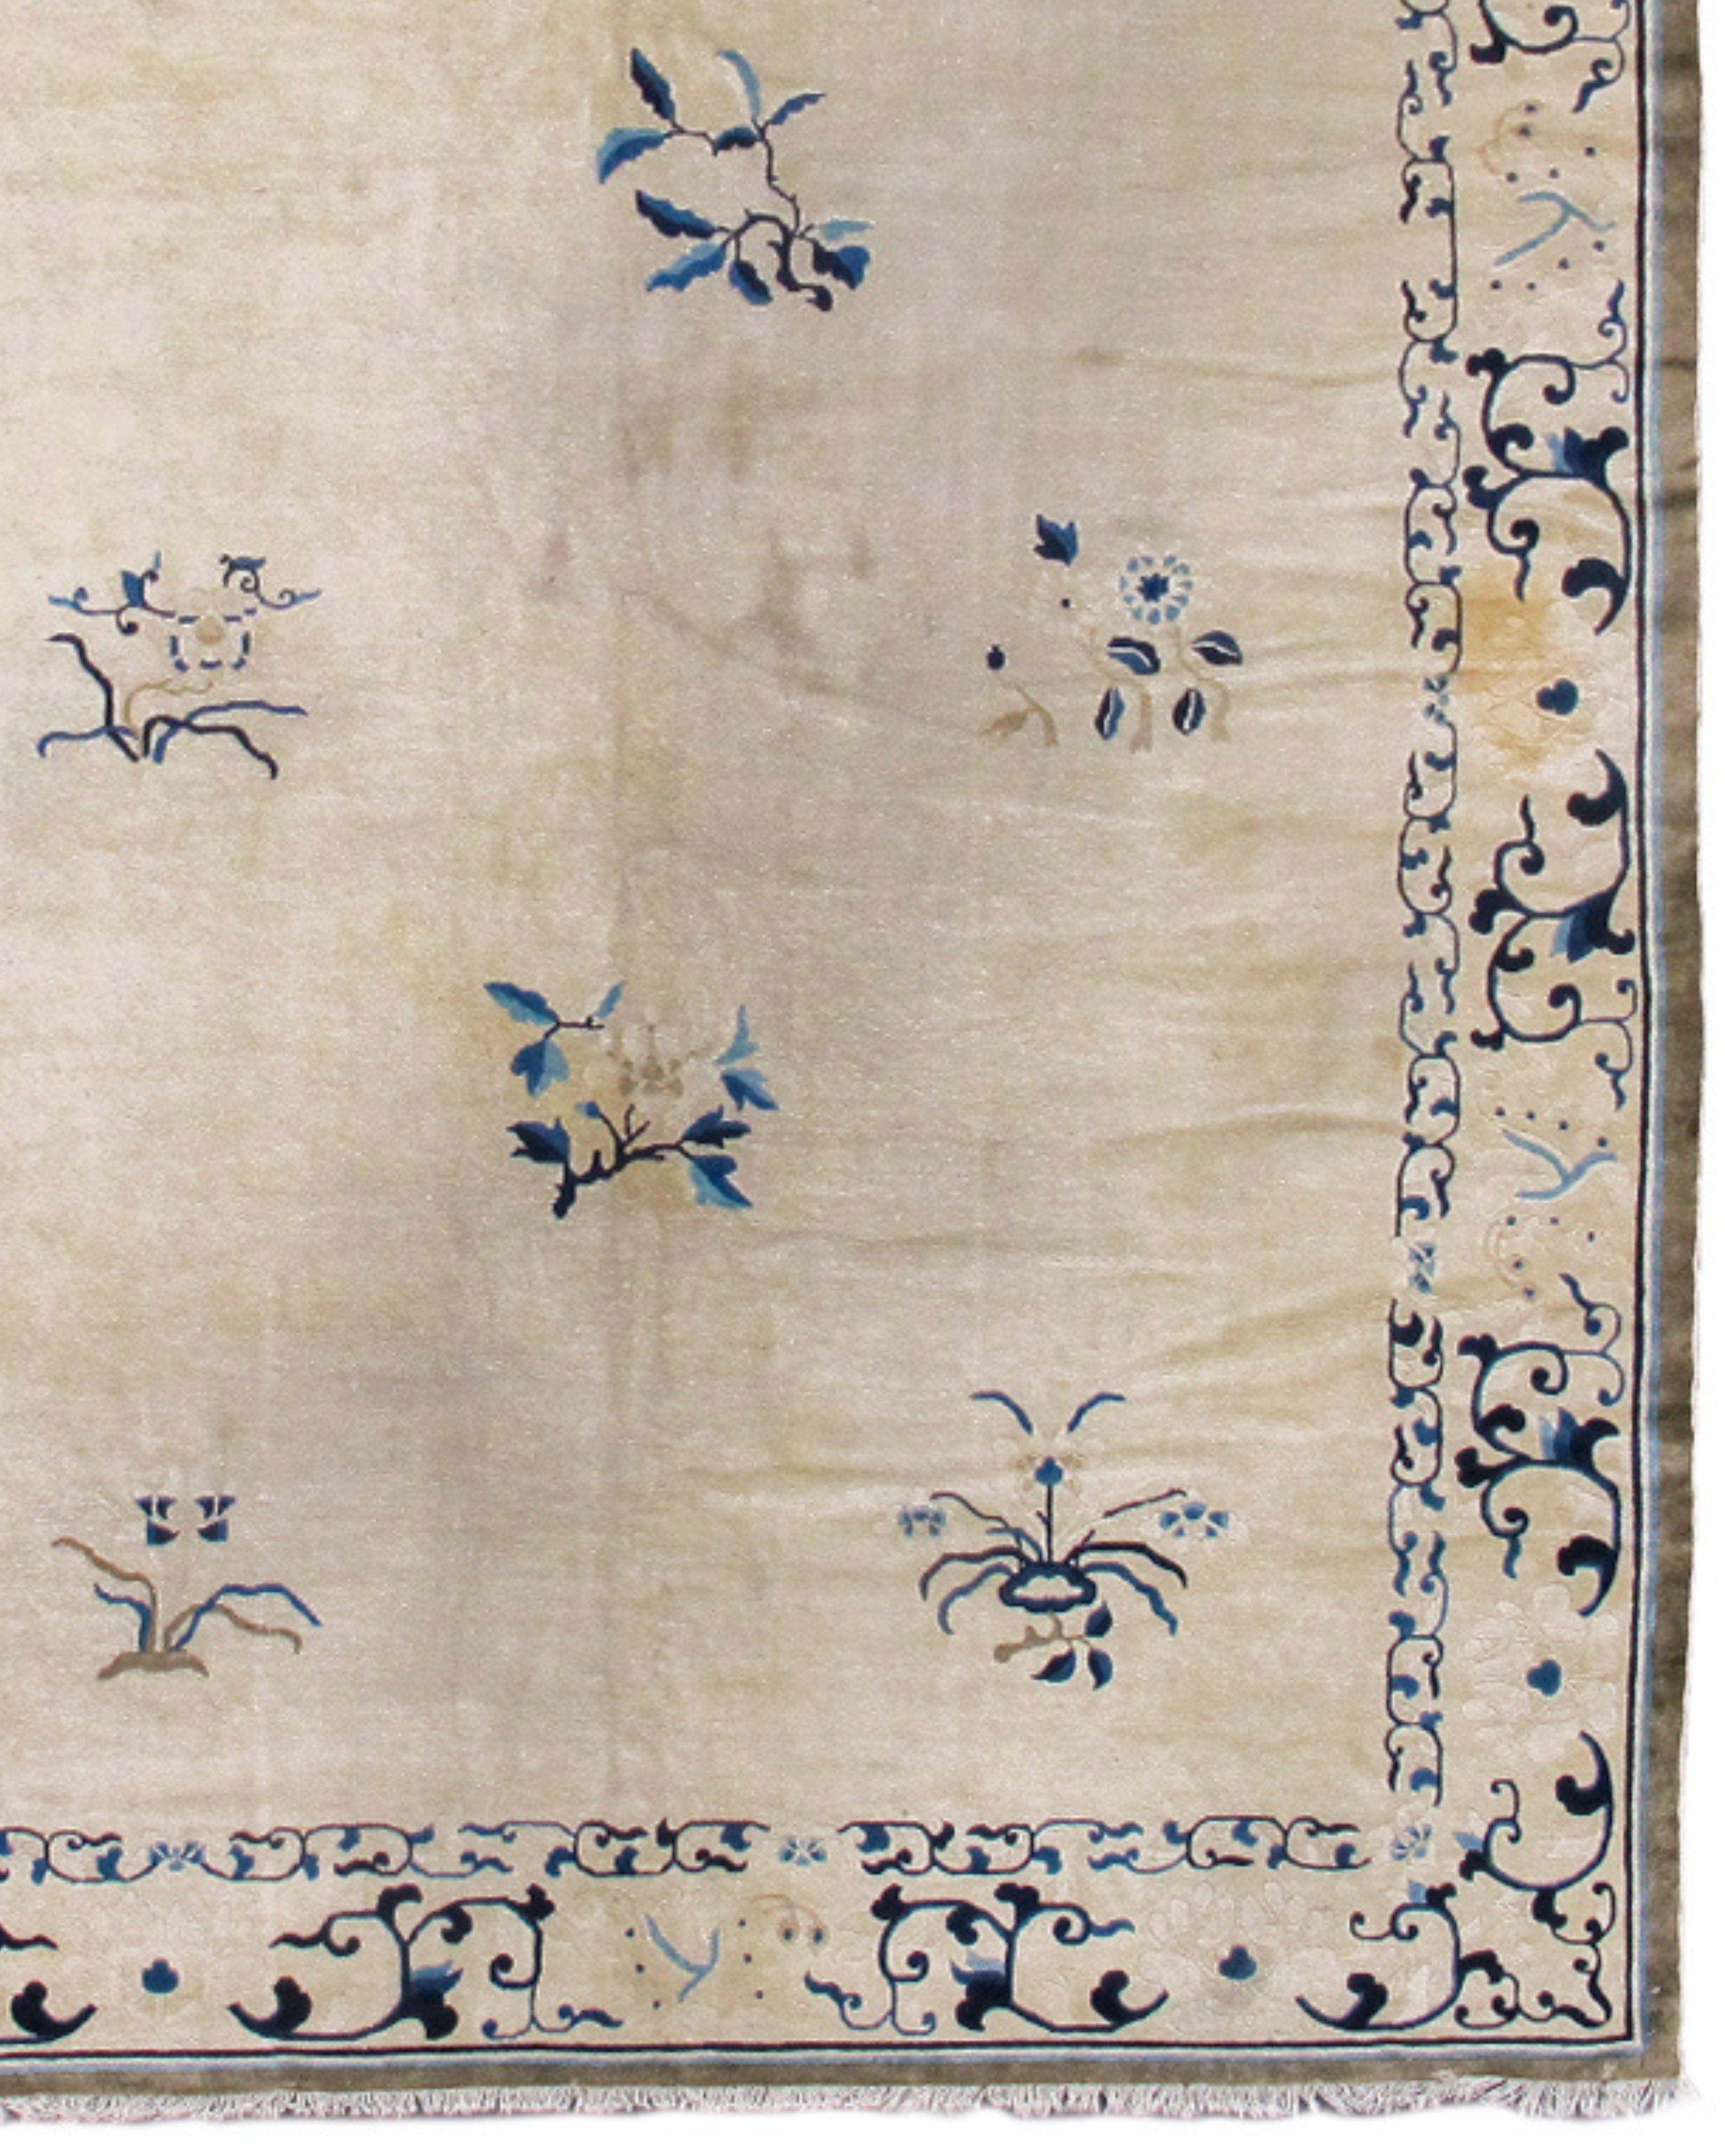 Peking Carpet, Late 19th Century

Additional Information:
Dimensions: 11'2